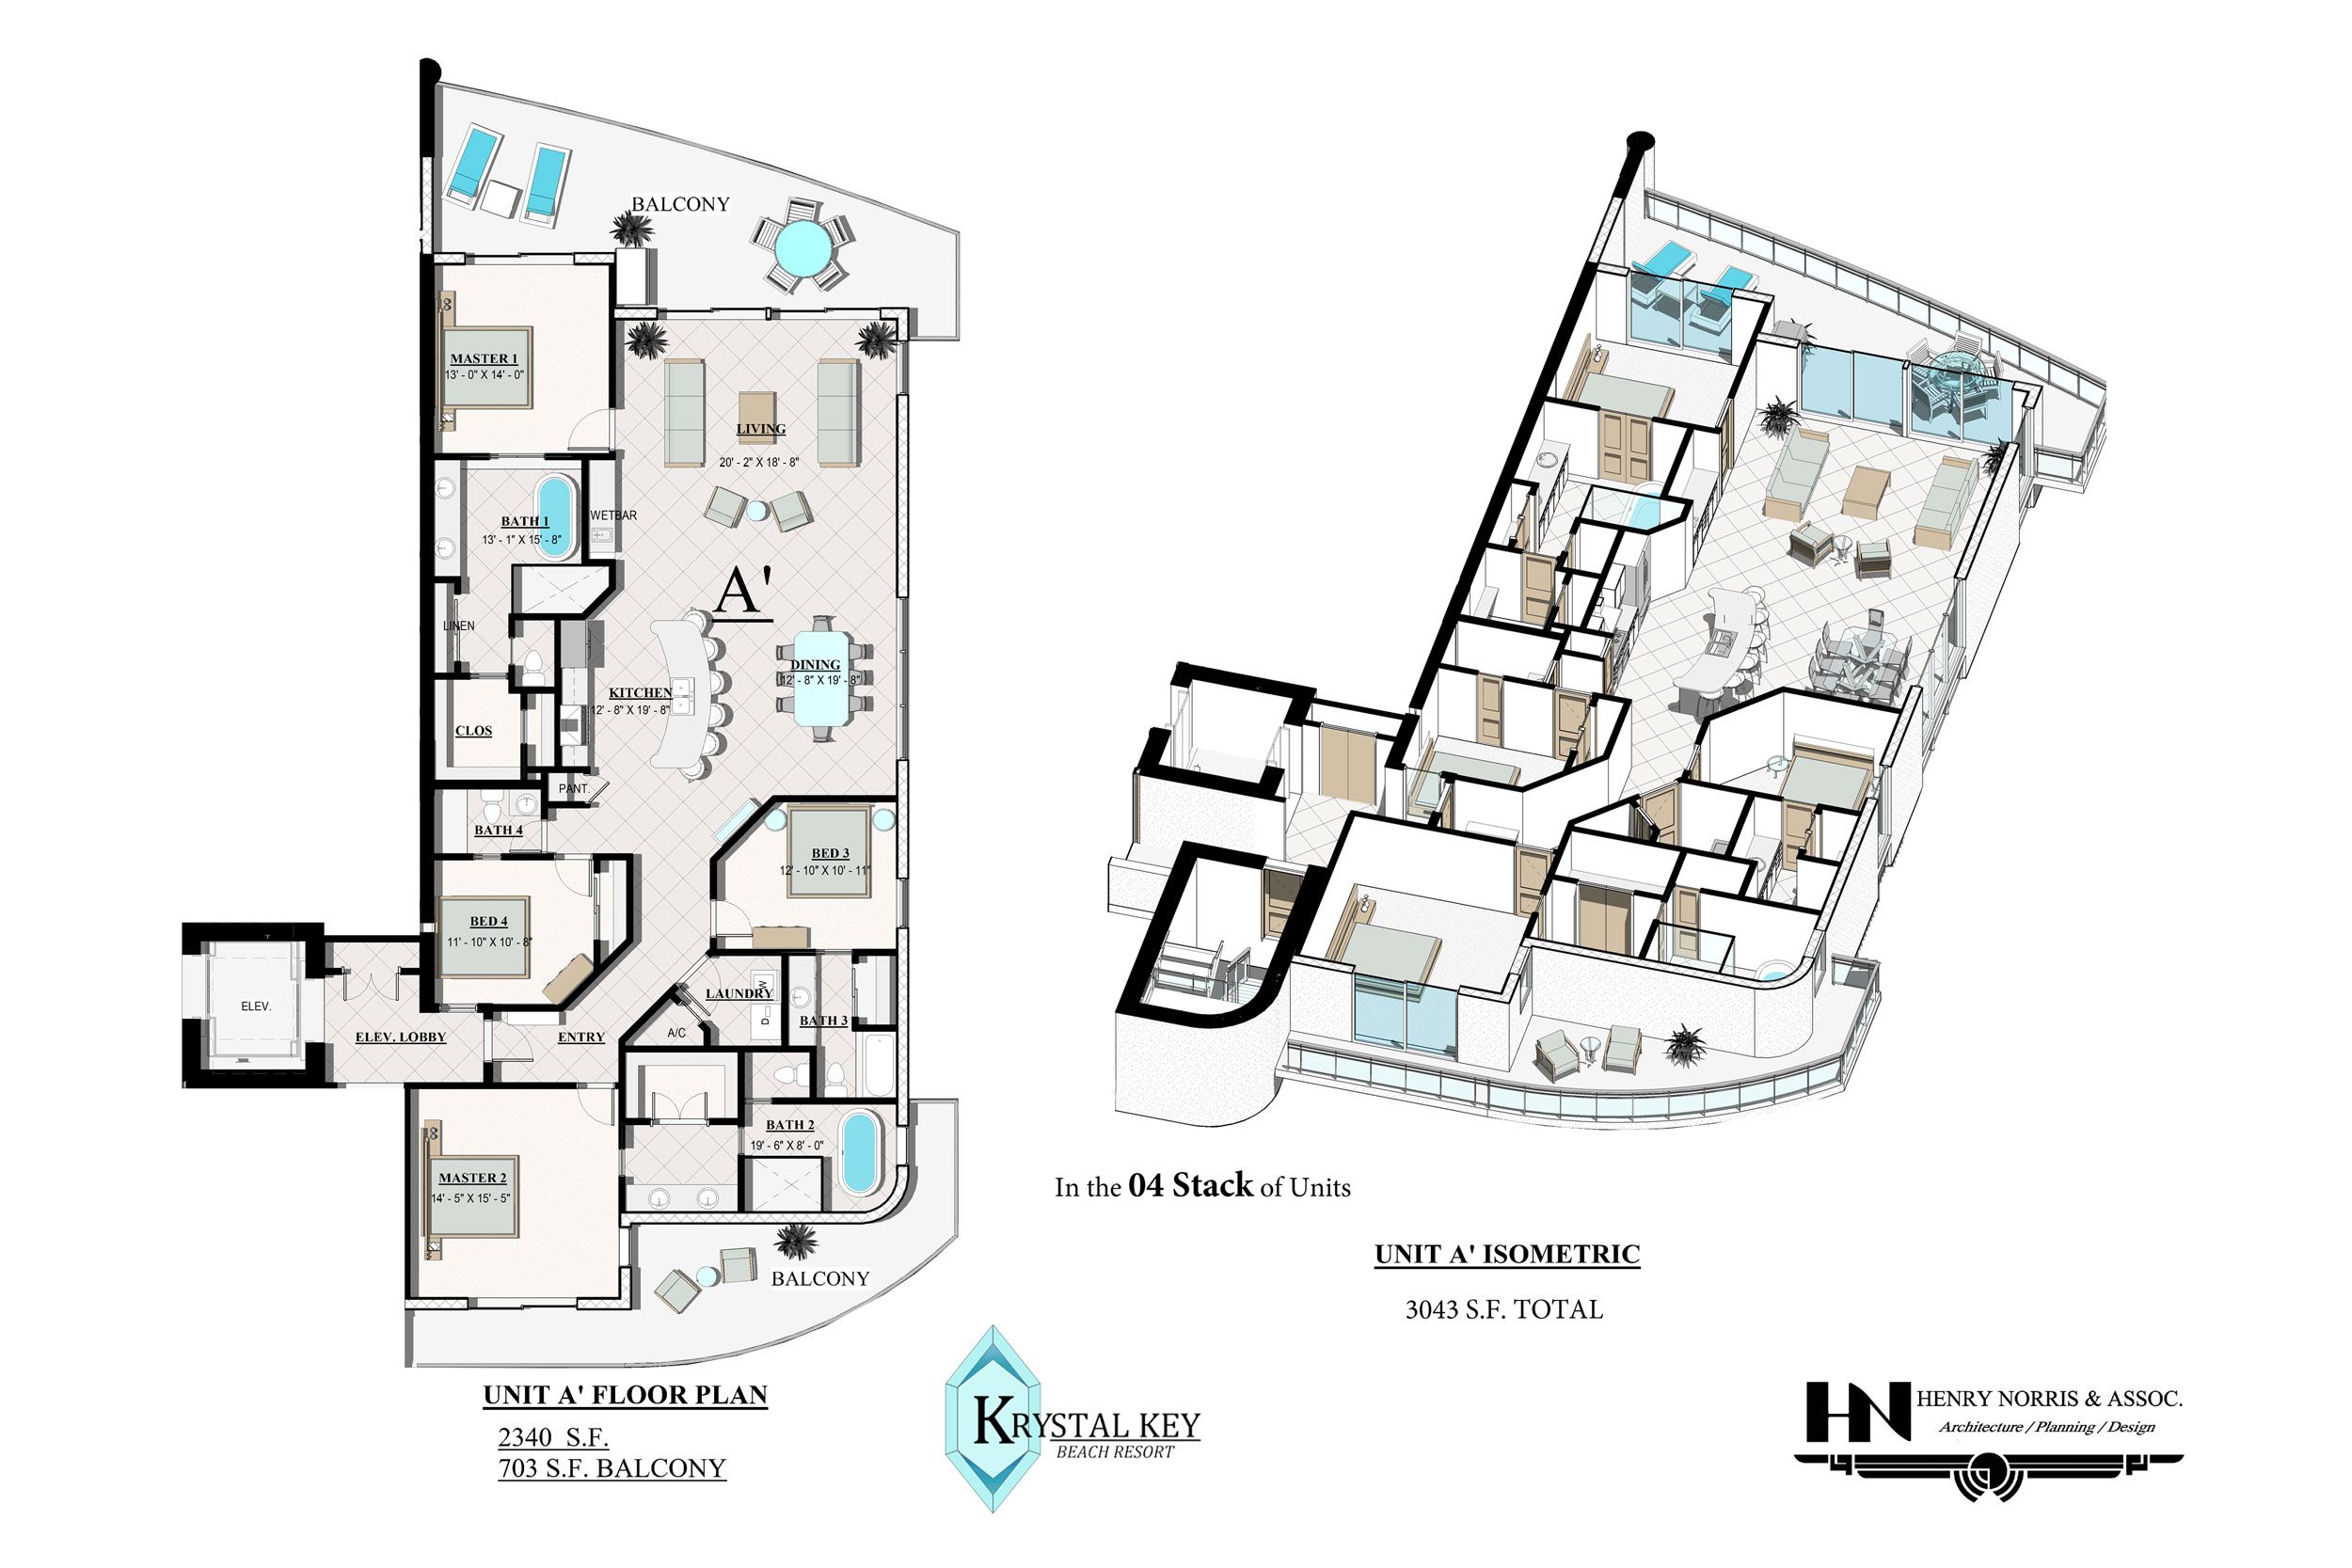 Unit A' Floor Plan in the 04 Stack